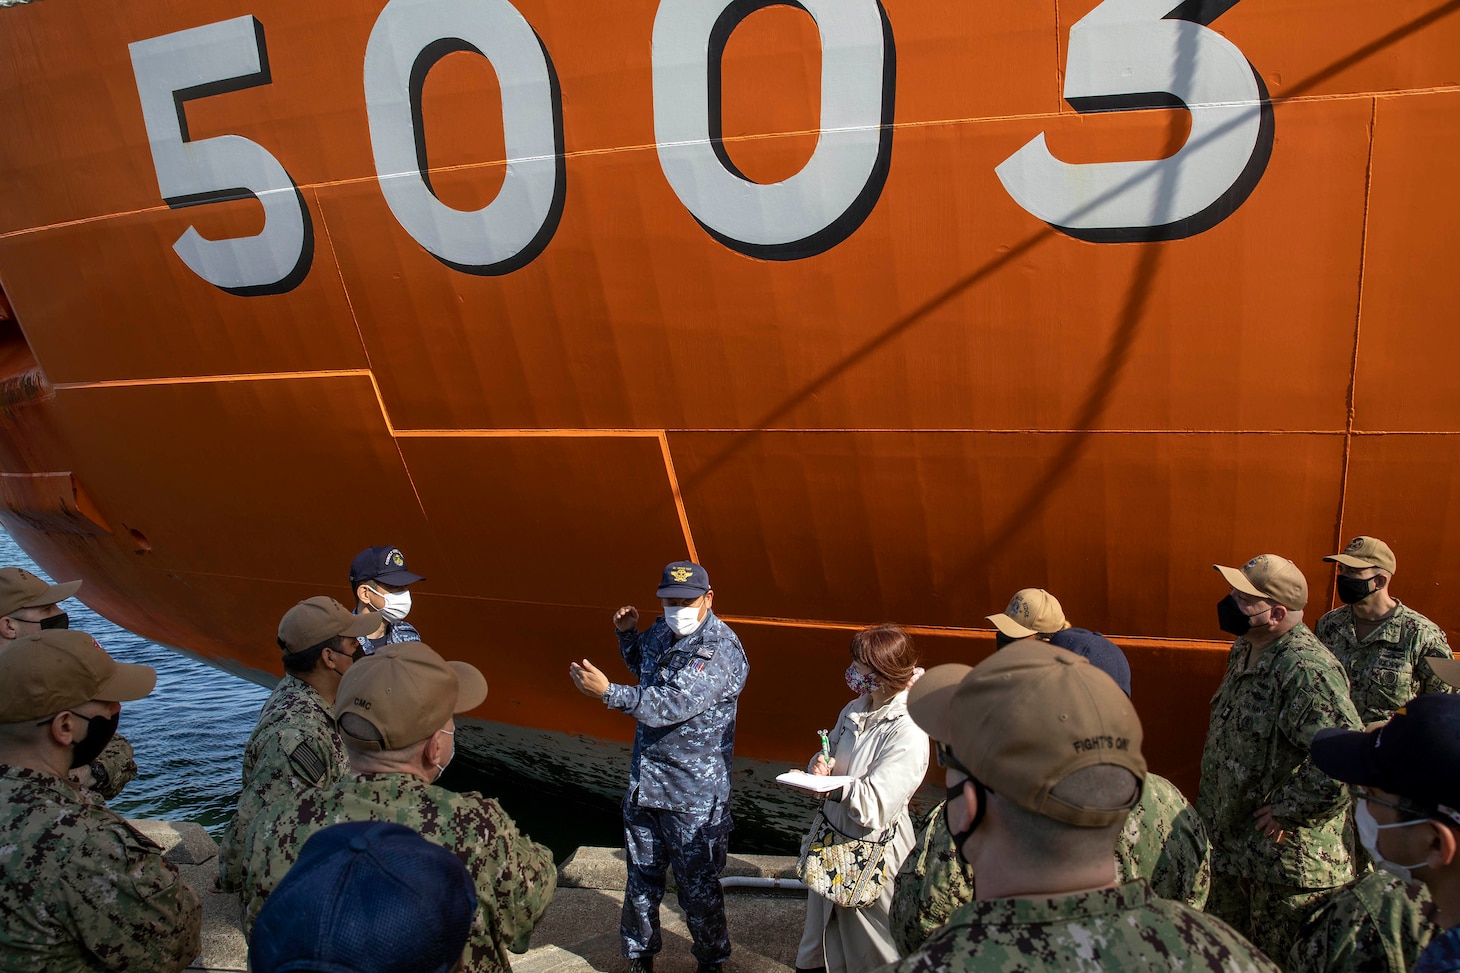 220405-N-MM501-1328 YOKOSUKA, Japan (April 5, 2022) Self-Defense Fleet Master Chief Yoshihiro Aoyama tells Japan Maritime Self-Defense Force and U.S. Navy Sailors about the JMSDF icebreaker Shirase (AGB 5003) during the U.S. 7th Fleet Sailor of the Year Week, April 5. U.S. 7th Fleet conducts forward-deployed naval operations in support of U.S. national interests in the Indo-Asia-Pacific area of operations. As the U.S. Navy’s largest numbered fleet, 7th Fleet interacts with 35 other maritime nations to build maritime partnerships that foster maritime security, promote stability, and prevent conflict. (U.S. Navy photo by Mass Communication Specialist 2nd Class Shannon Burns)